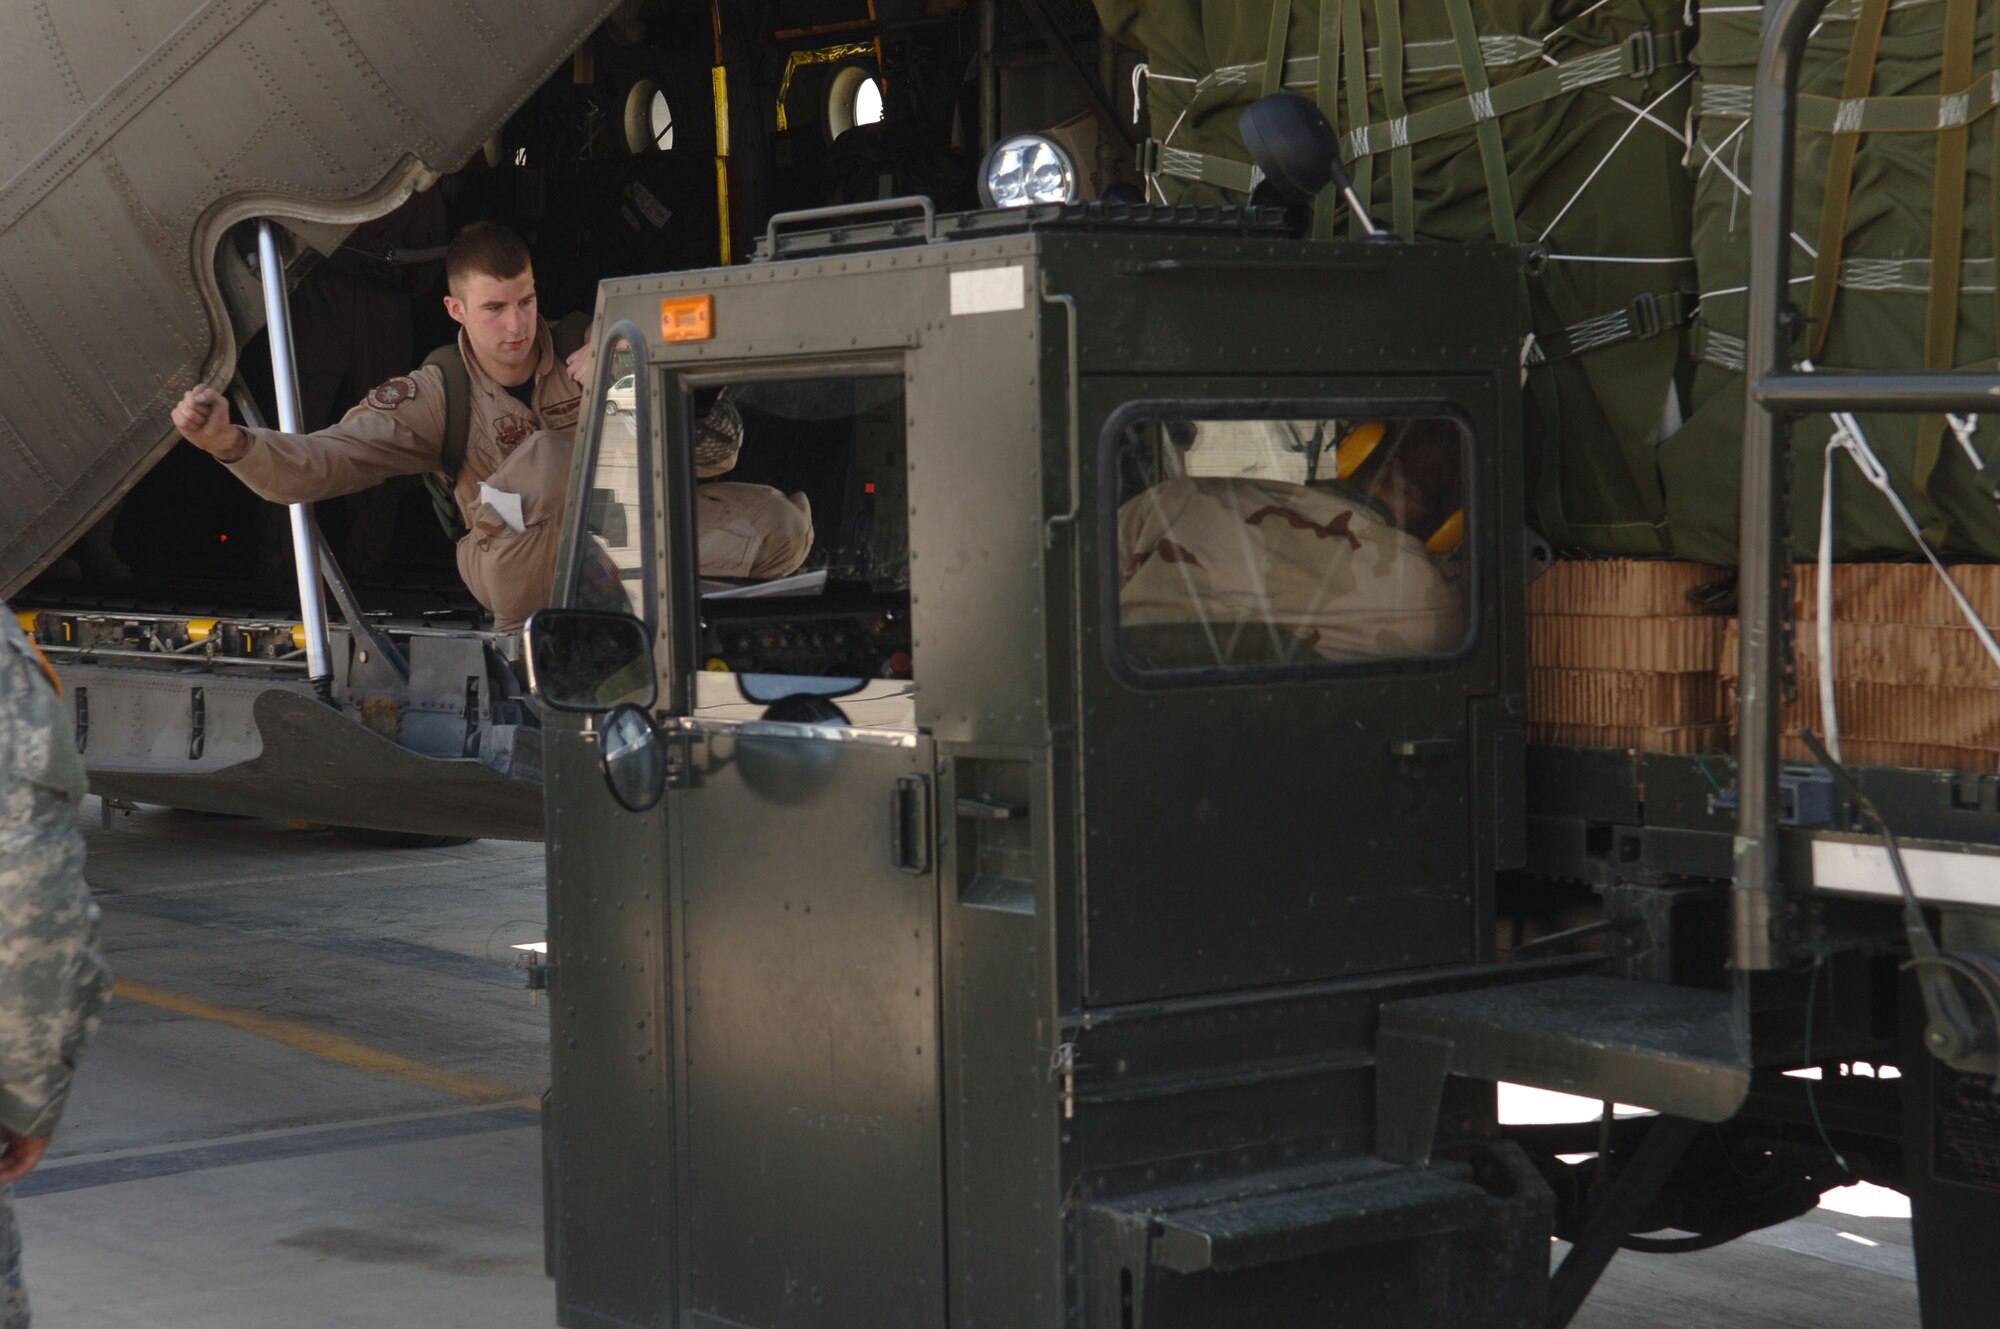 Senior Airman Travis Robotkay signals the driver of a cargo loader to stop during loading operations at Bagram Air Base, Afghanistan, on Saturday, April 15, 2006. Airman Robotkay is a loadmaster with the 774th Expeditionary Airlift Squadron and is deployed from Kulis Air National Guard Base, Alaska. (U.S. Air Force photo/Staff Sgt. Jennifer Redente)